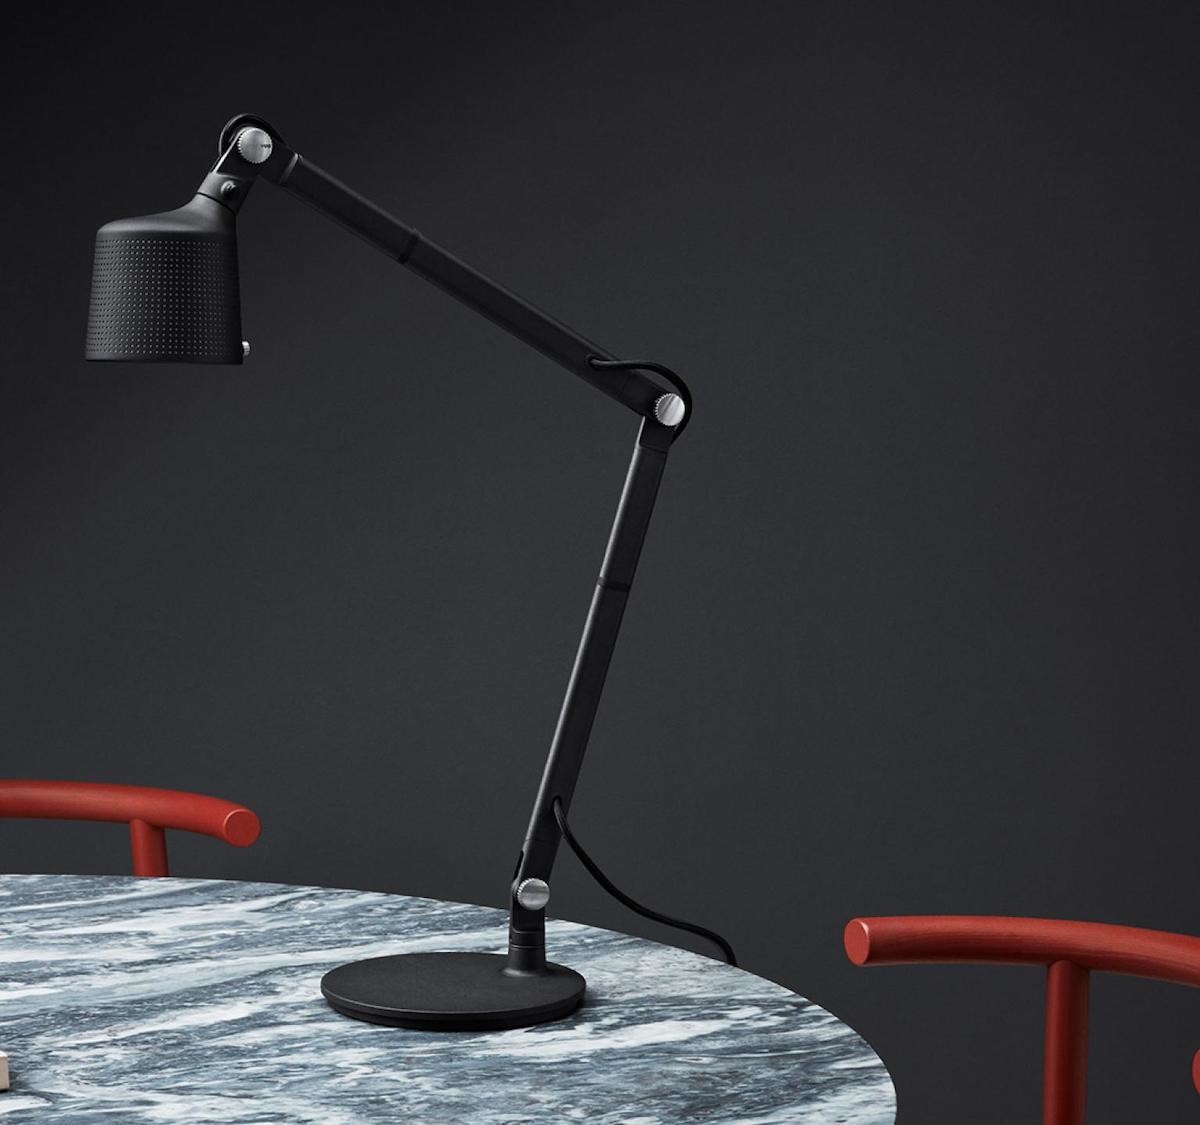 Vipp Desk Lamp Work Light adjusts to just the right position